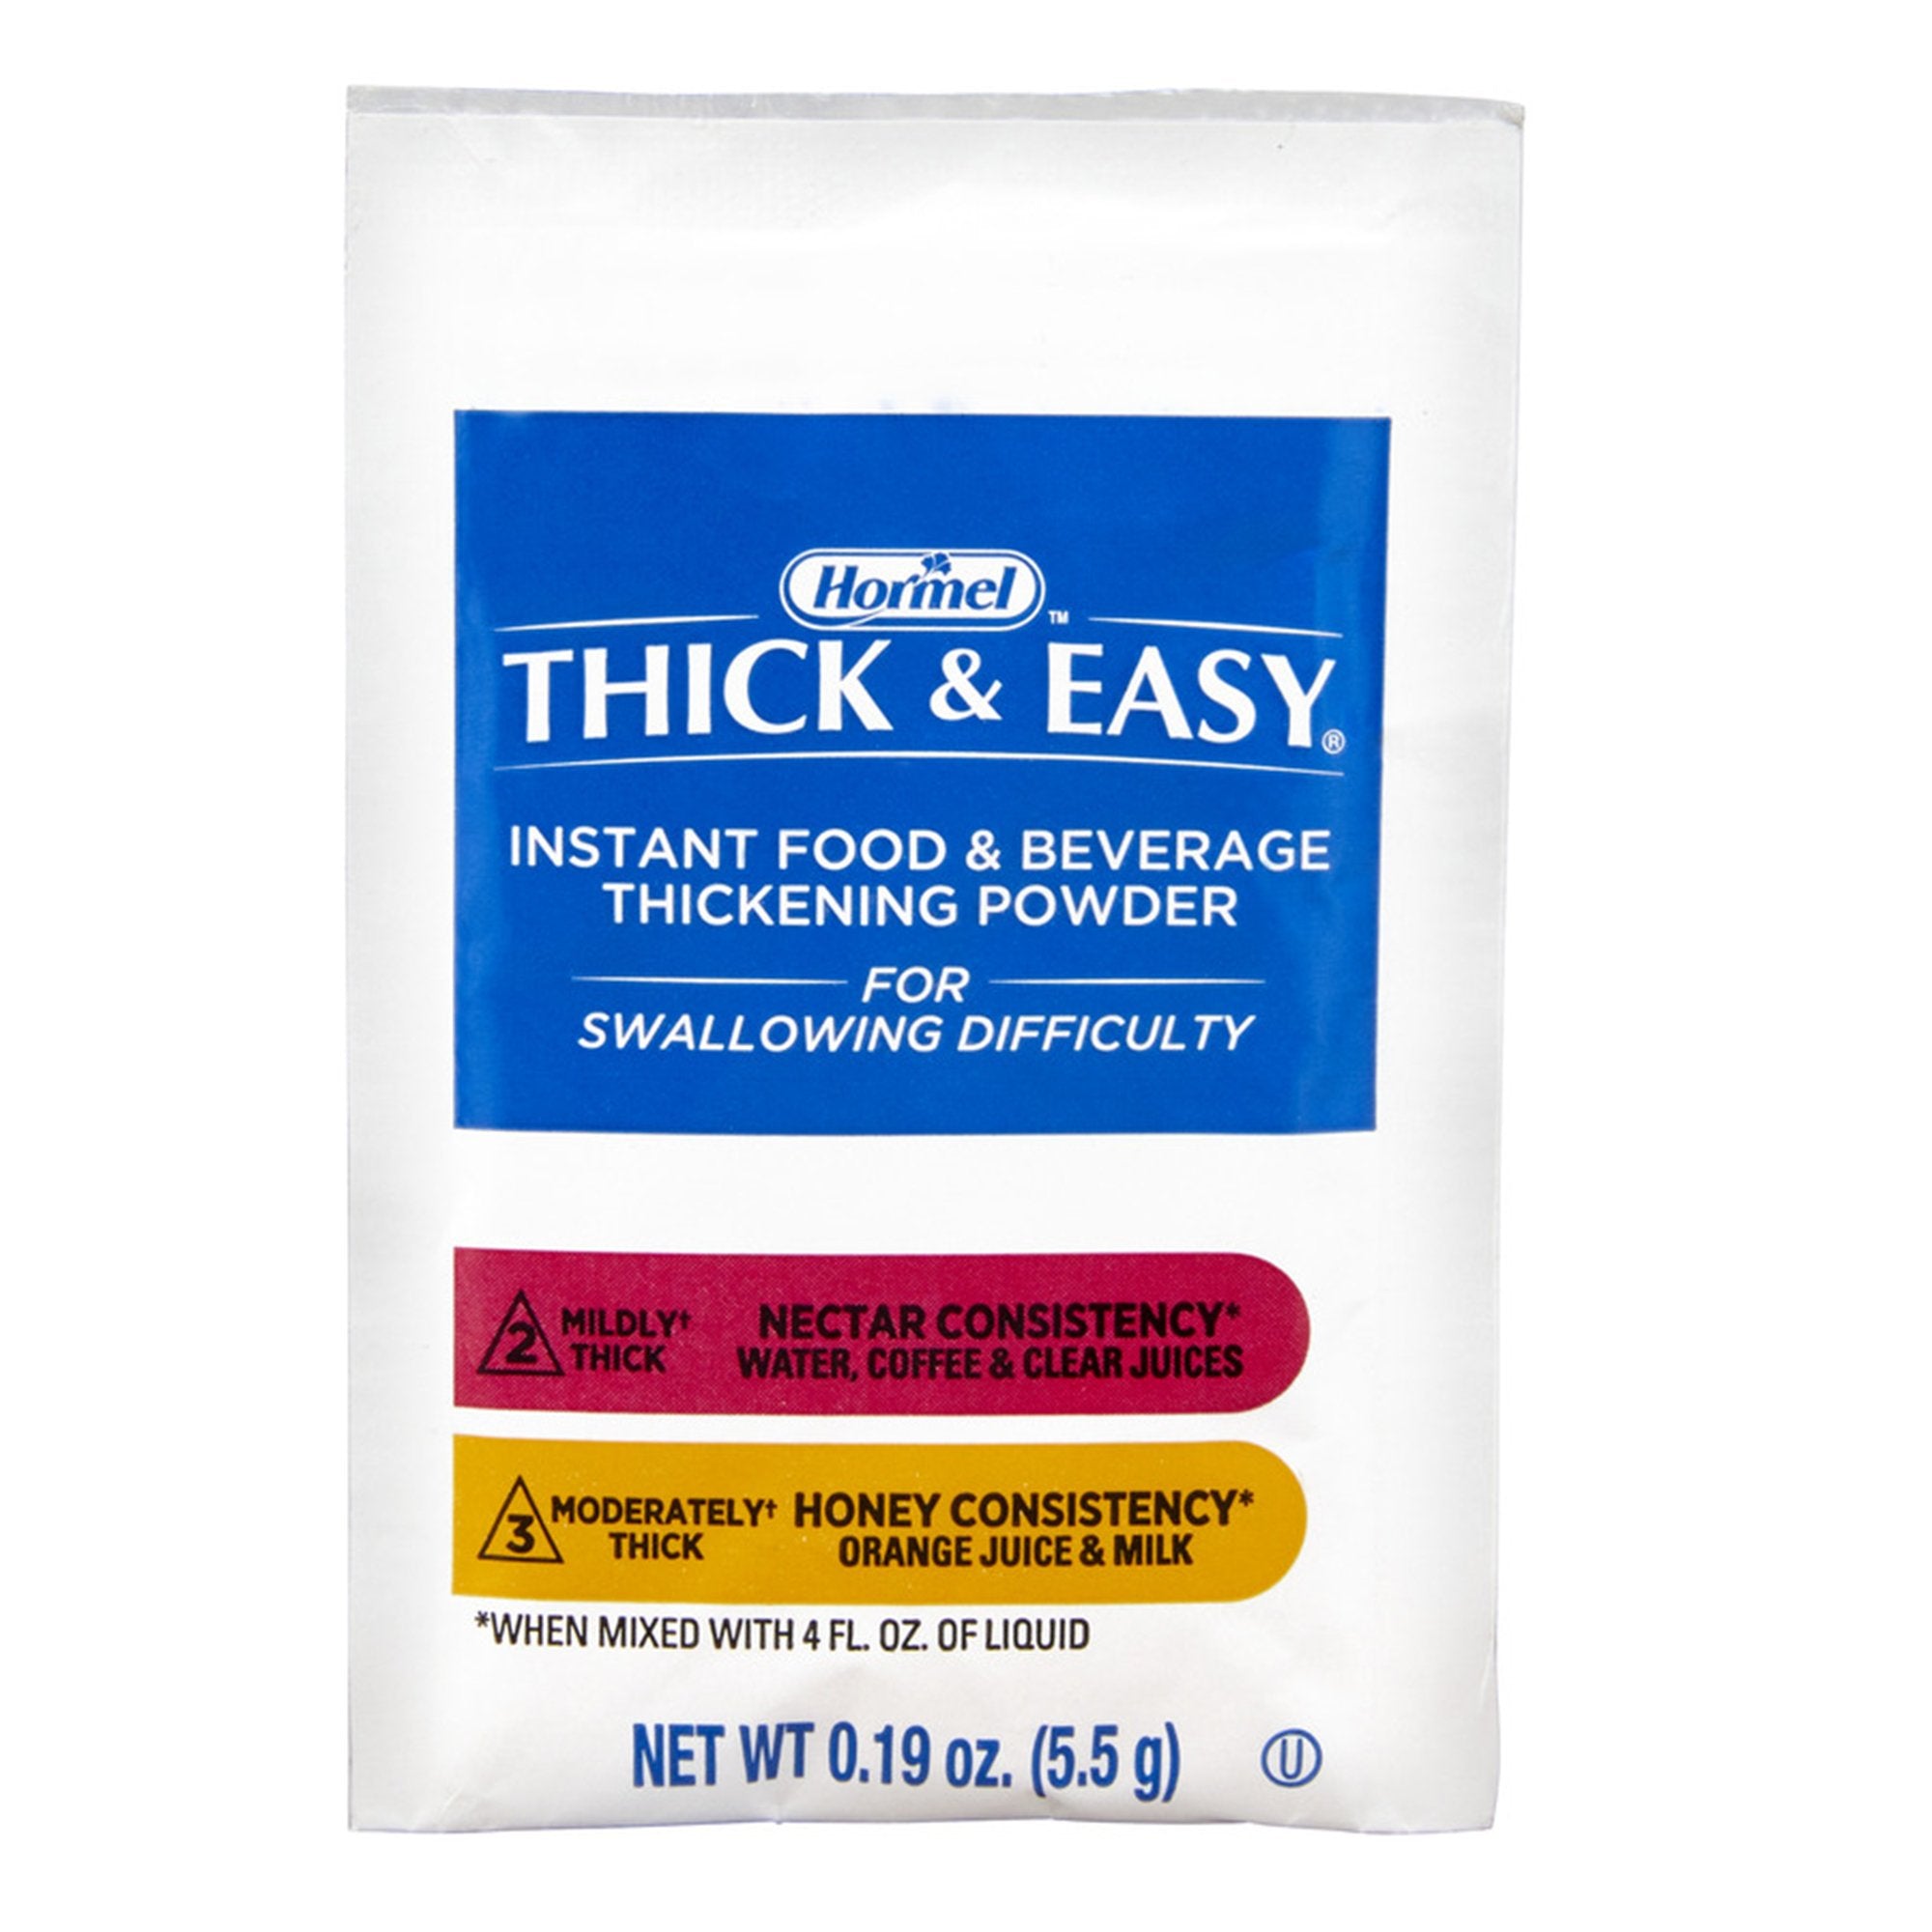 Food and Beverage Thickener Thick & Easy 5.5 Gram Individual Packet Unflavored Powder IDDSI Level 2 Mildly Thick